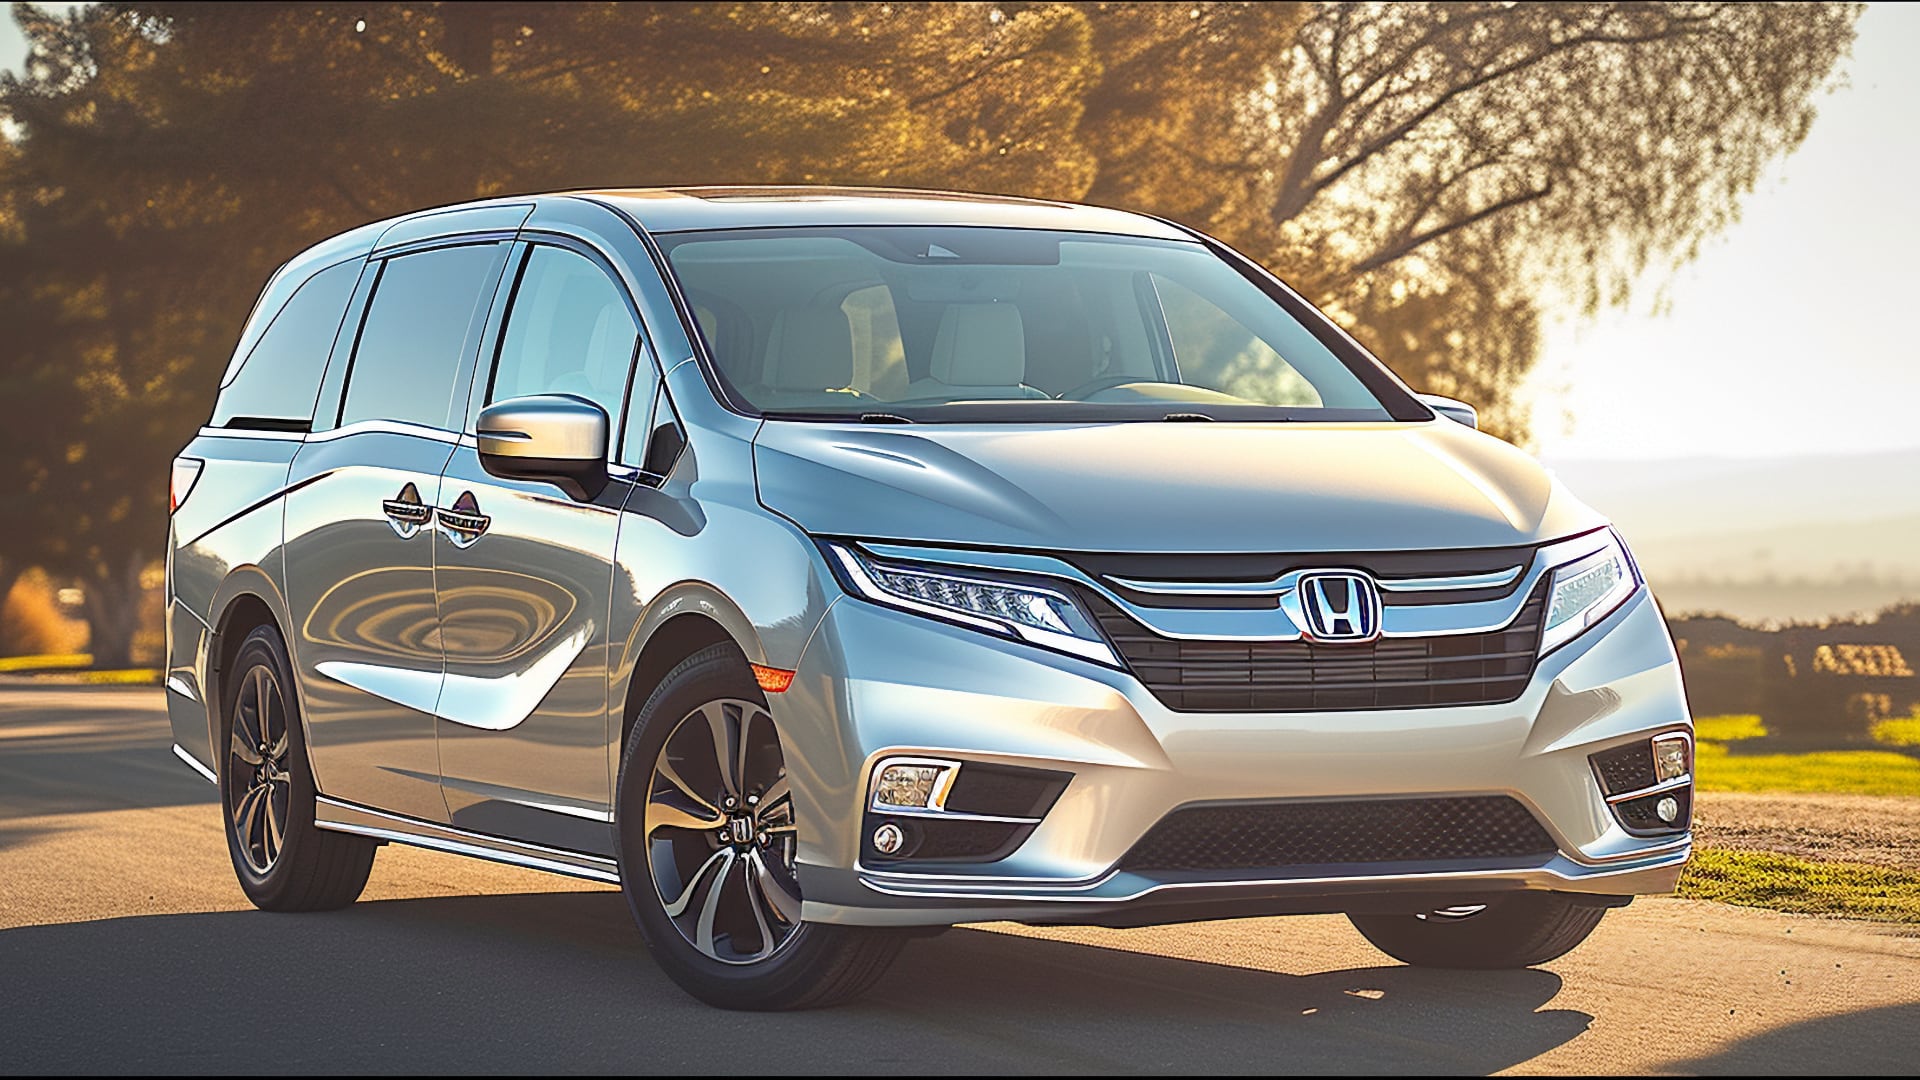 The 2019 Honda Odyssey gracefully cruises down a scenic country road.